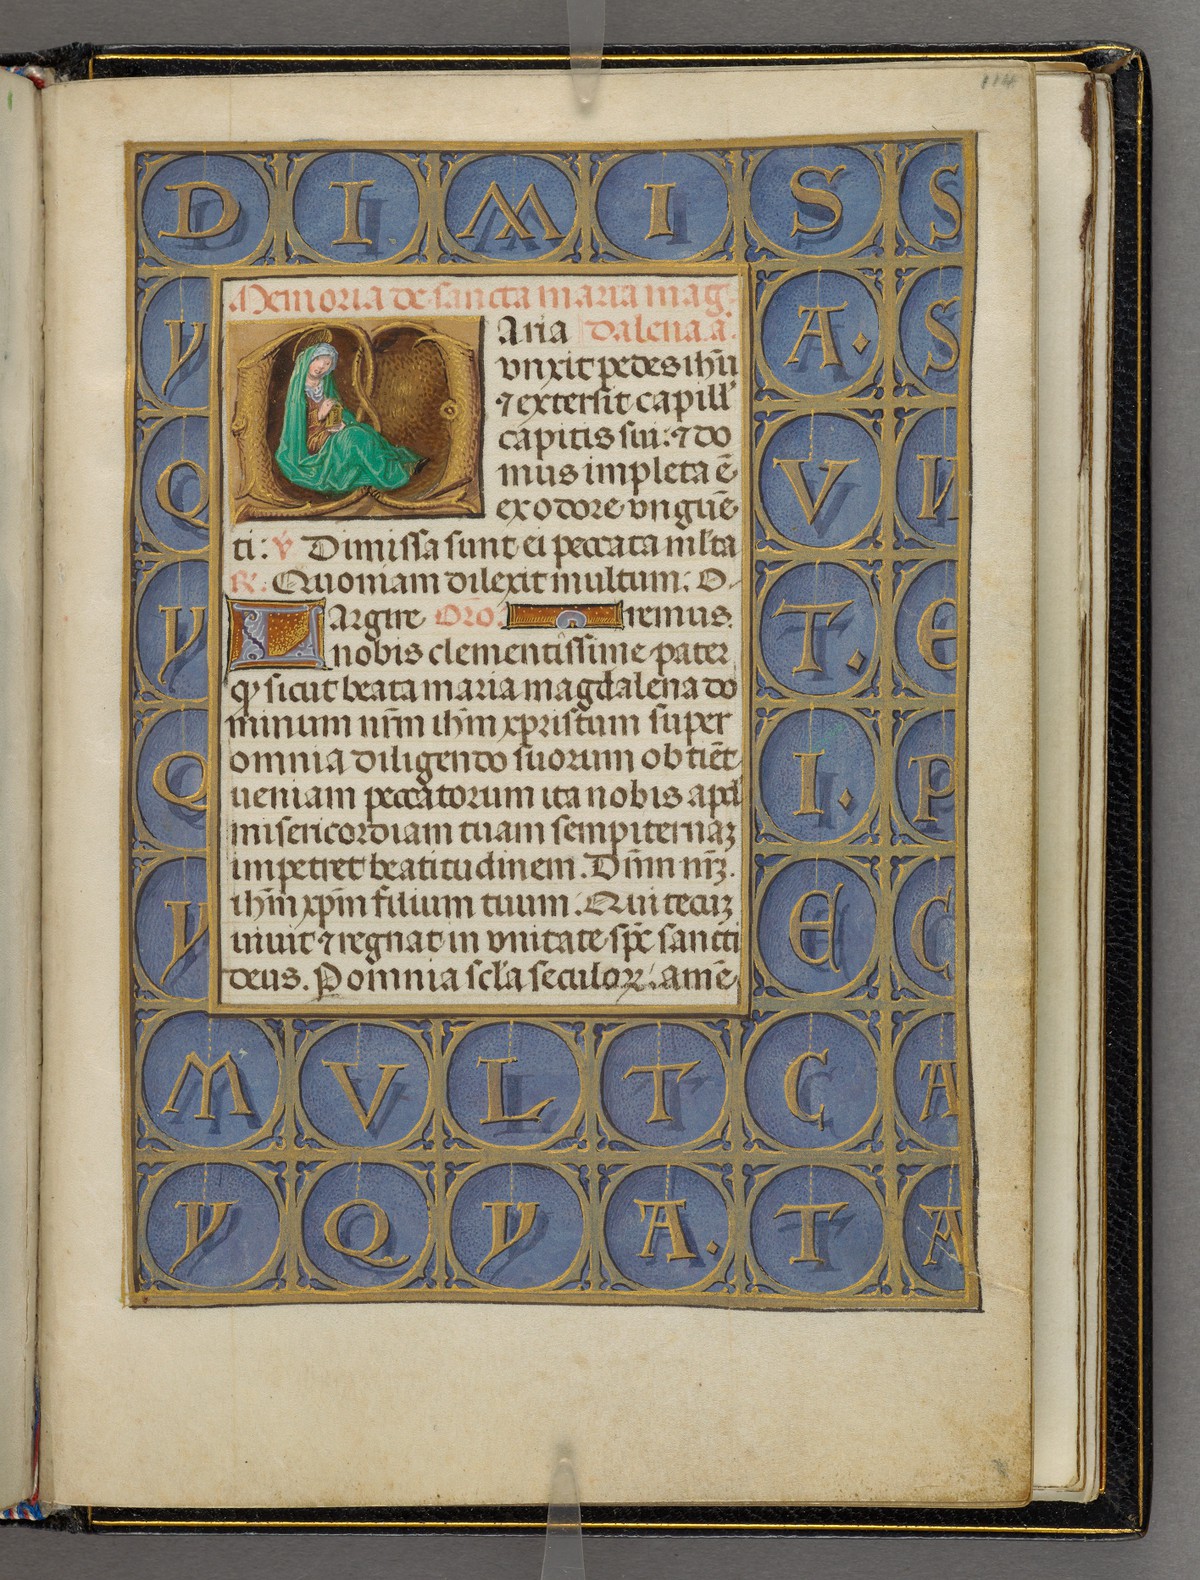 1480 ca Emerson-White Hours use of Rome Harvard University, Houghton Library, MSS Typ 443 fol 114r